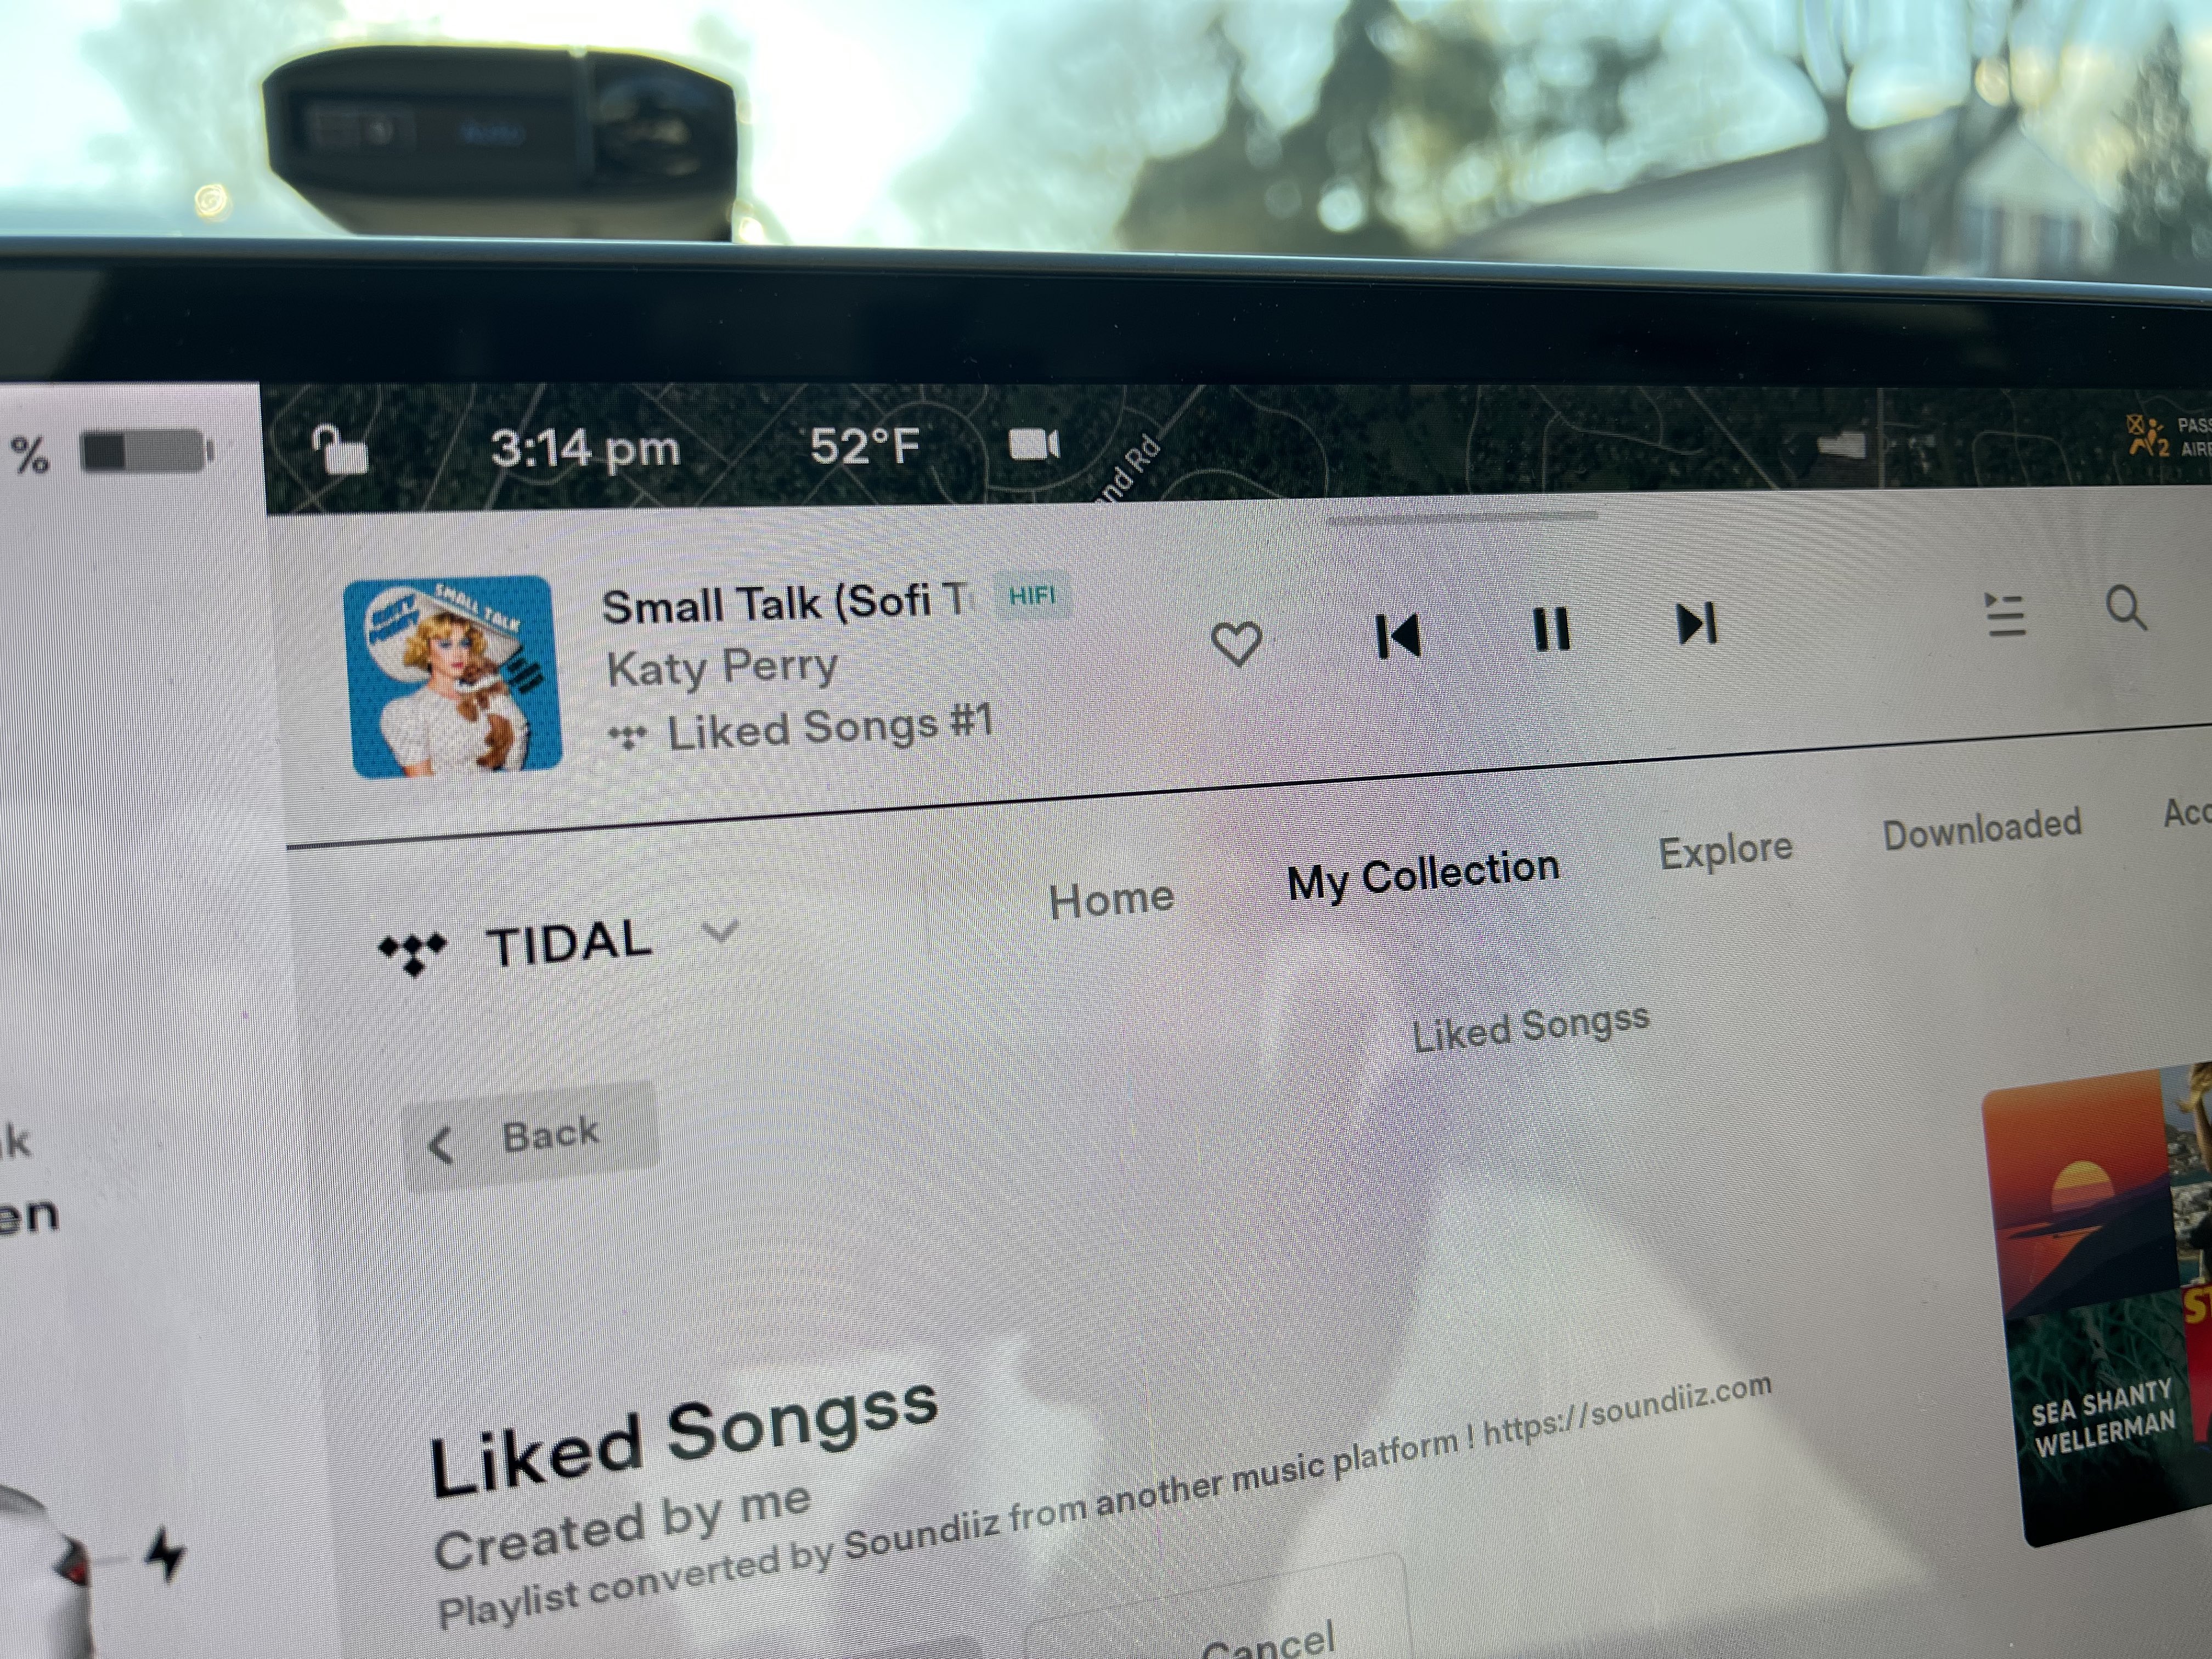 Jeff 💙✌️ on X: Keep an eye out for the HIFI icon when streaming Tidal in  your Tesla to verify you're getting CD quality music! If you're not seeing  the HIFI logo